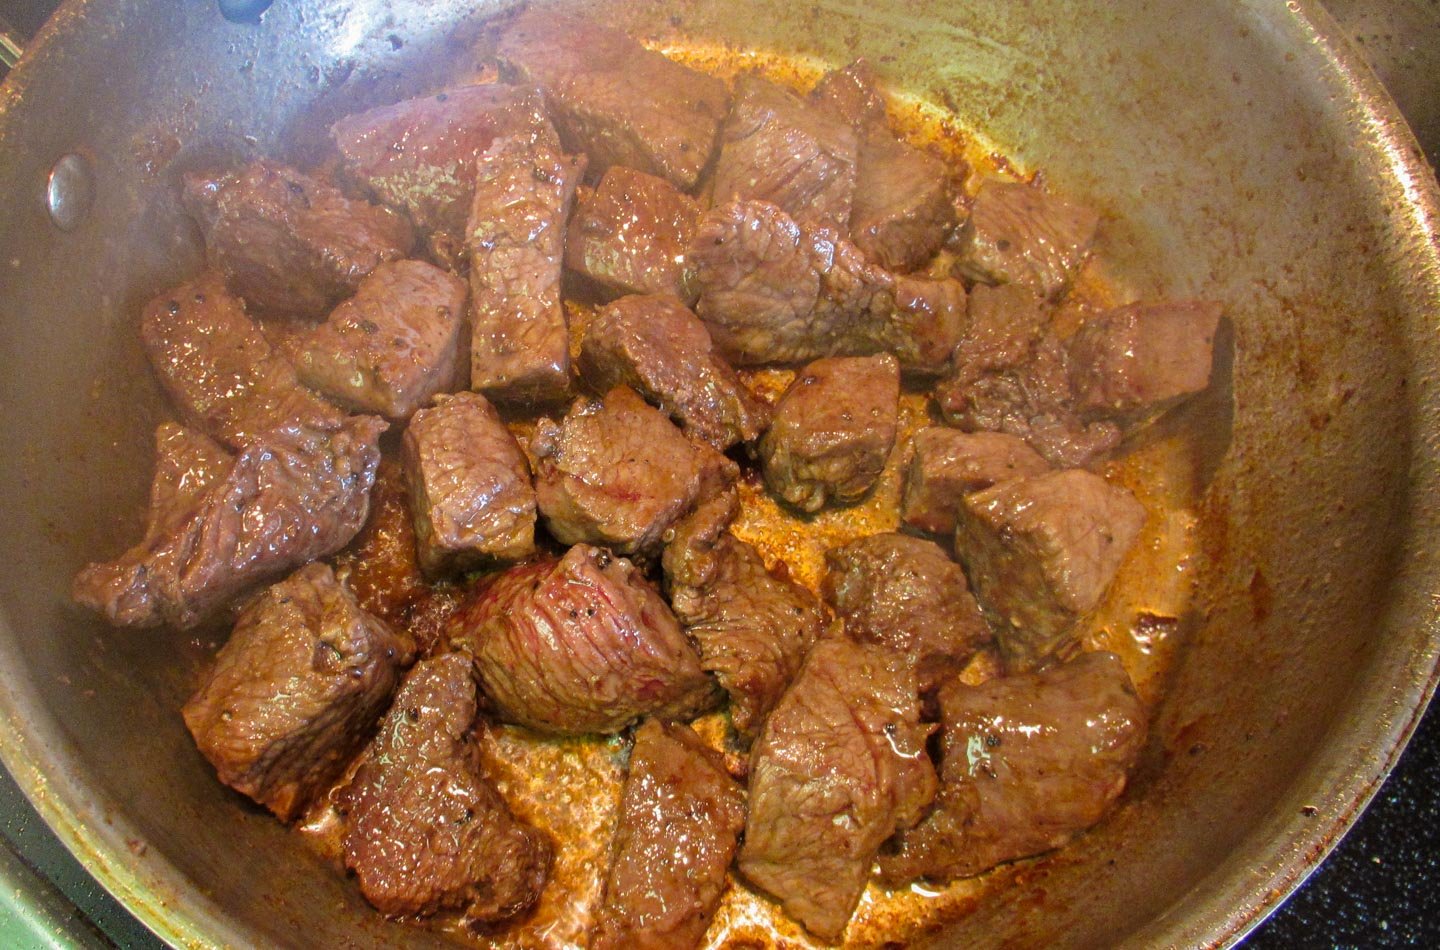 Cubes of beef searing in stainless steel frying pan.